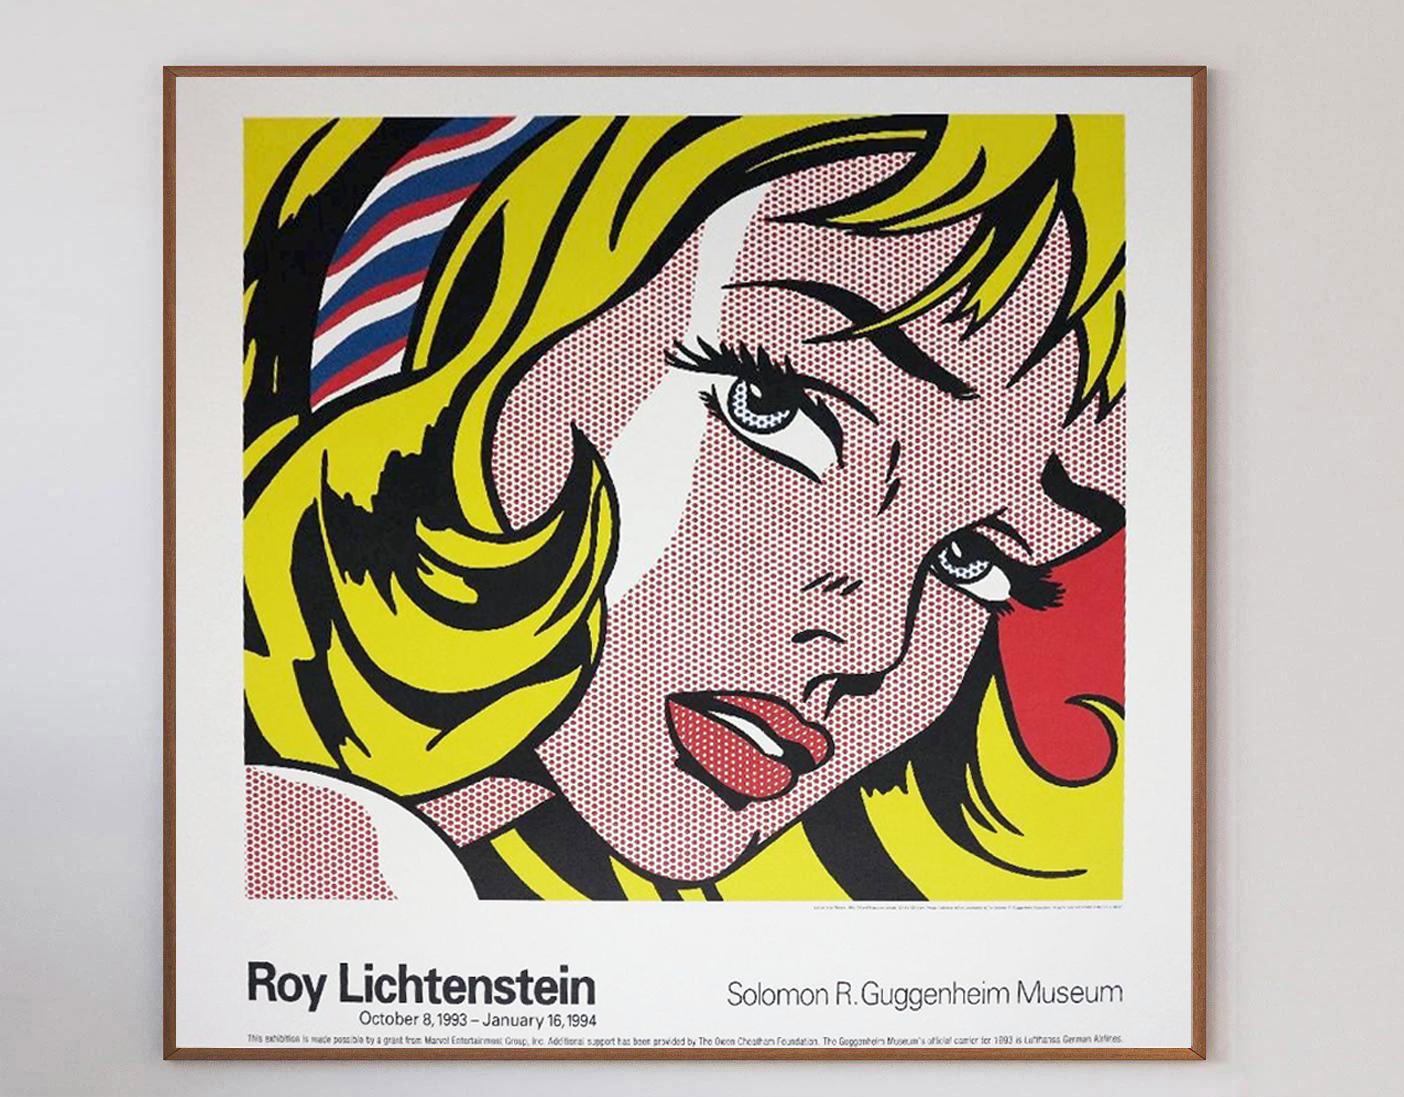 This beautiful poster is for Roy Lichtenstein's exhibition at the iconic Solomon R. Guggenheim Museum in New York in 1993 and features Lichtenstein's 1965 artwork 